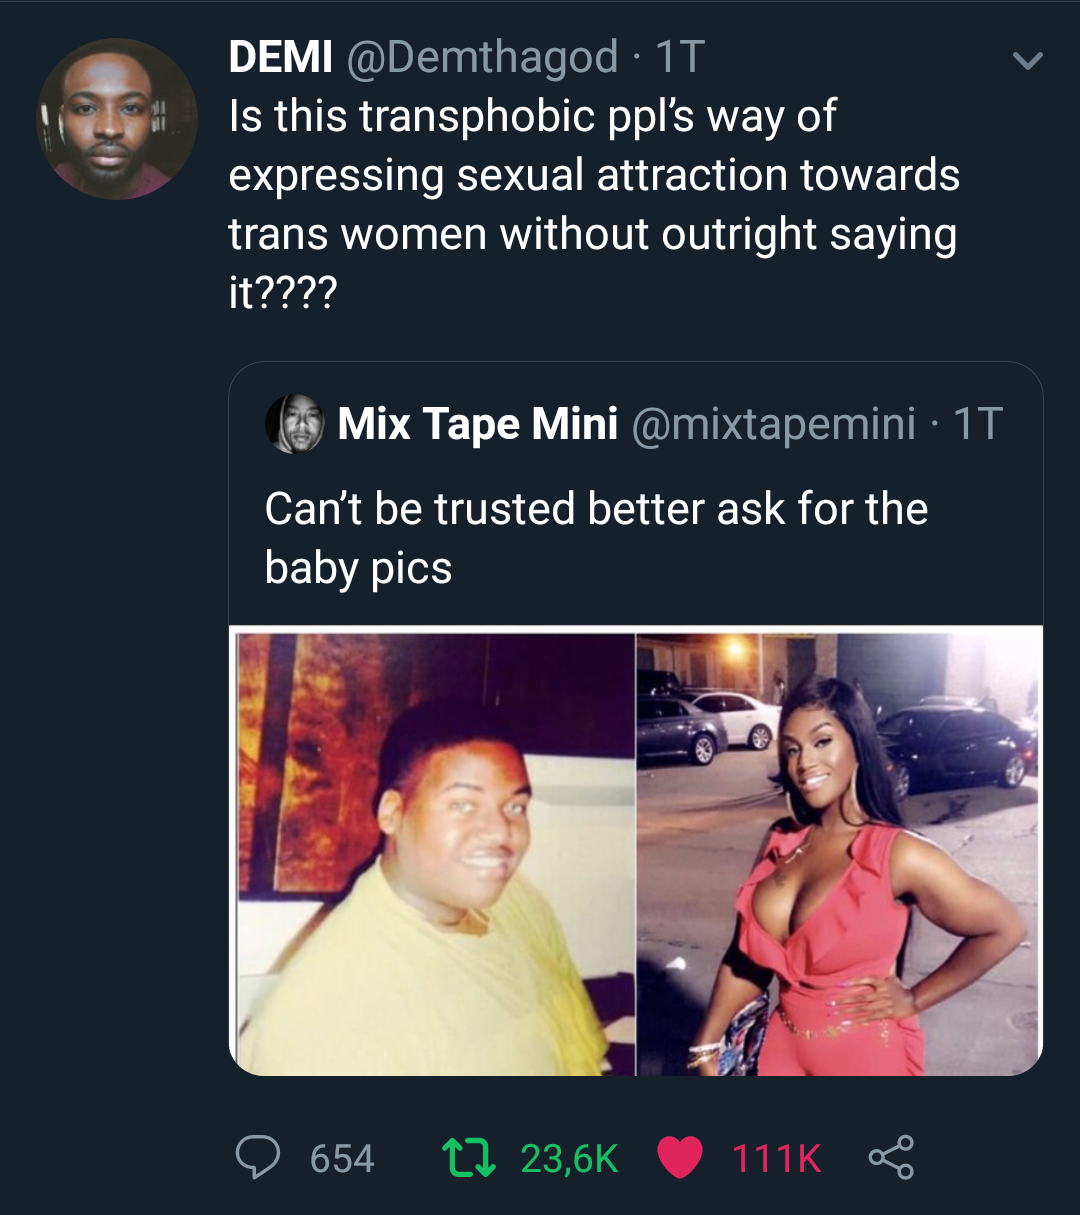 media - Demi 1T Is this transphobic ppl's way of expressing sexual attraction towards trans women without outright saying it???? Mix Tape Mini 11 Can't be trusted better ask for the baby pics 654 22